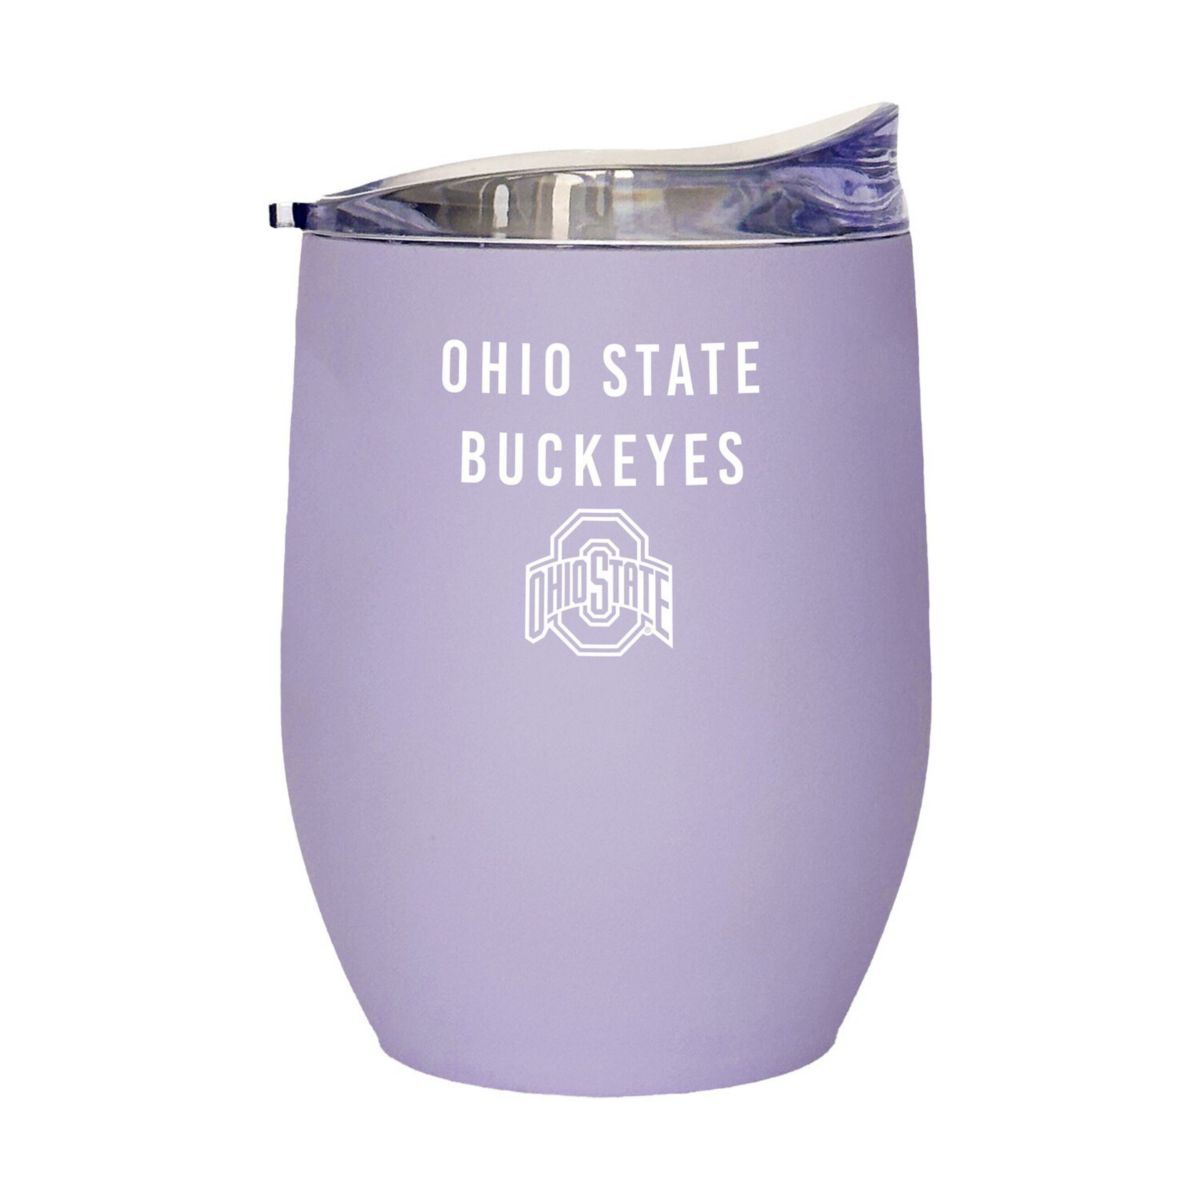 Ohio State Buckeyes 16oz. Lavender Soft Touch Curved Tumbler Logo Brand